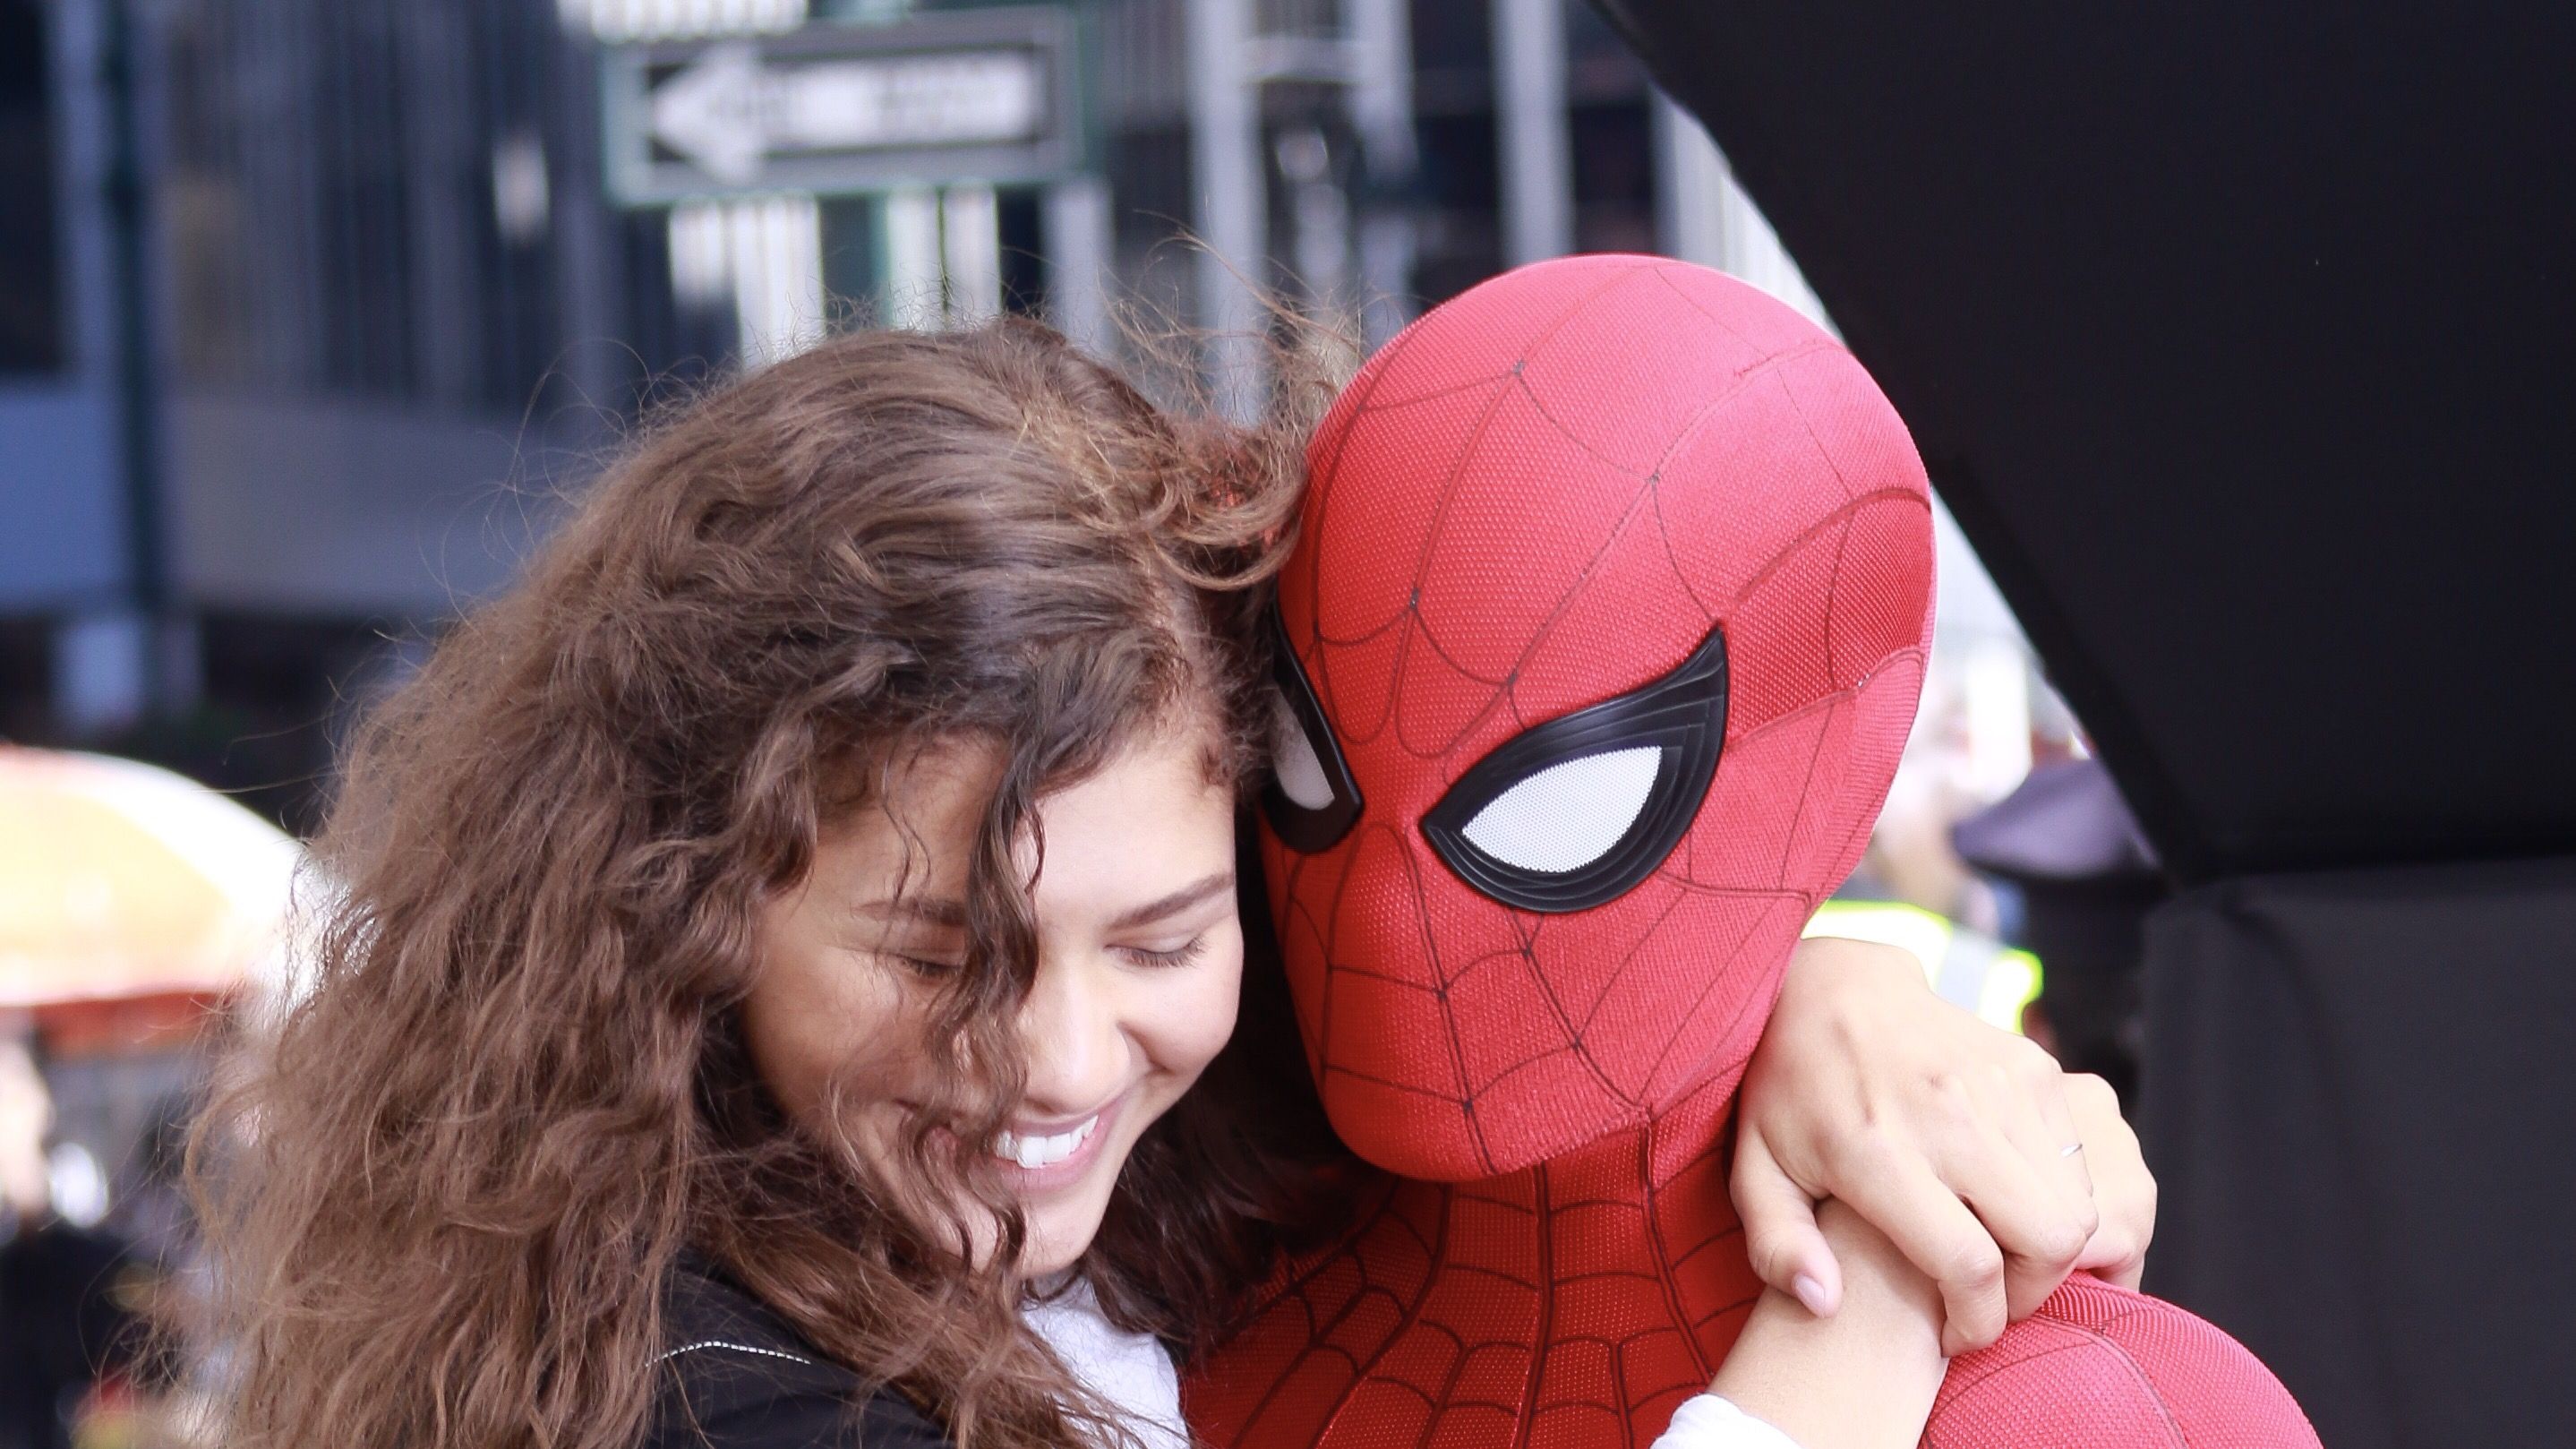 The Amazing Spider-Man Cast & Character Guide (and Where Are They Now)